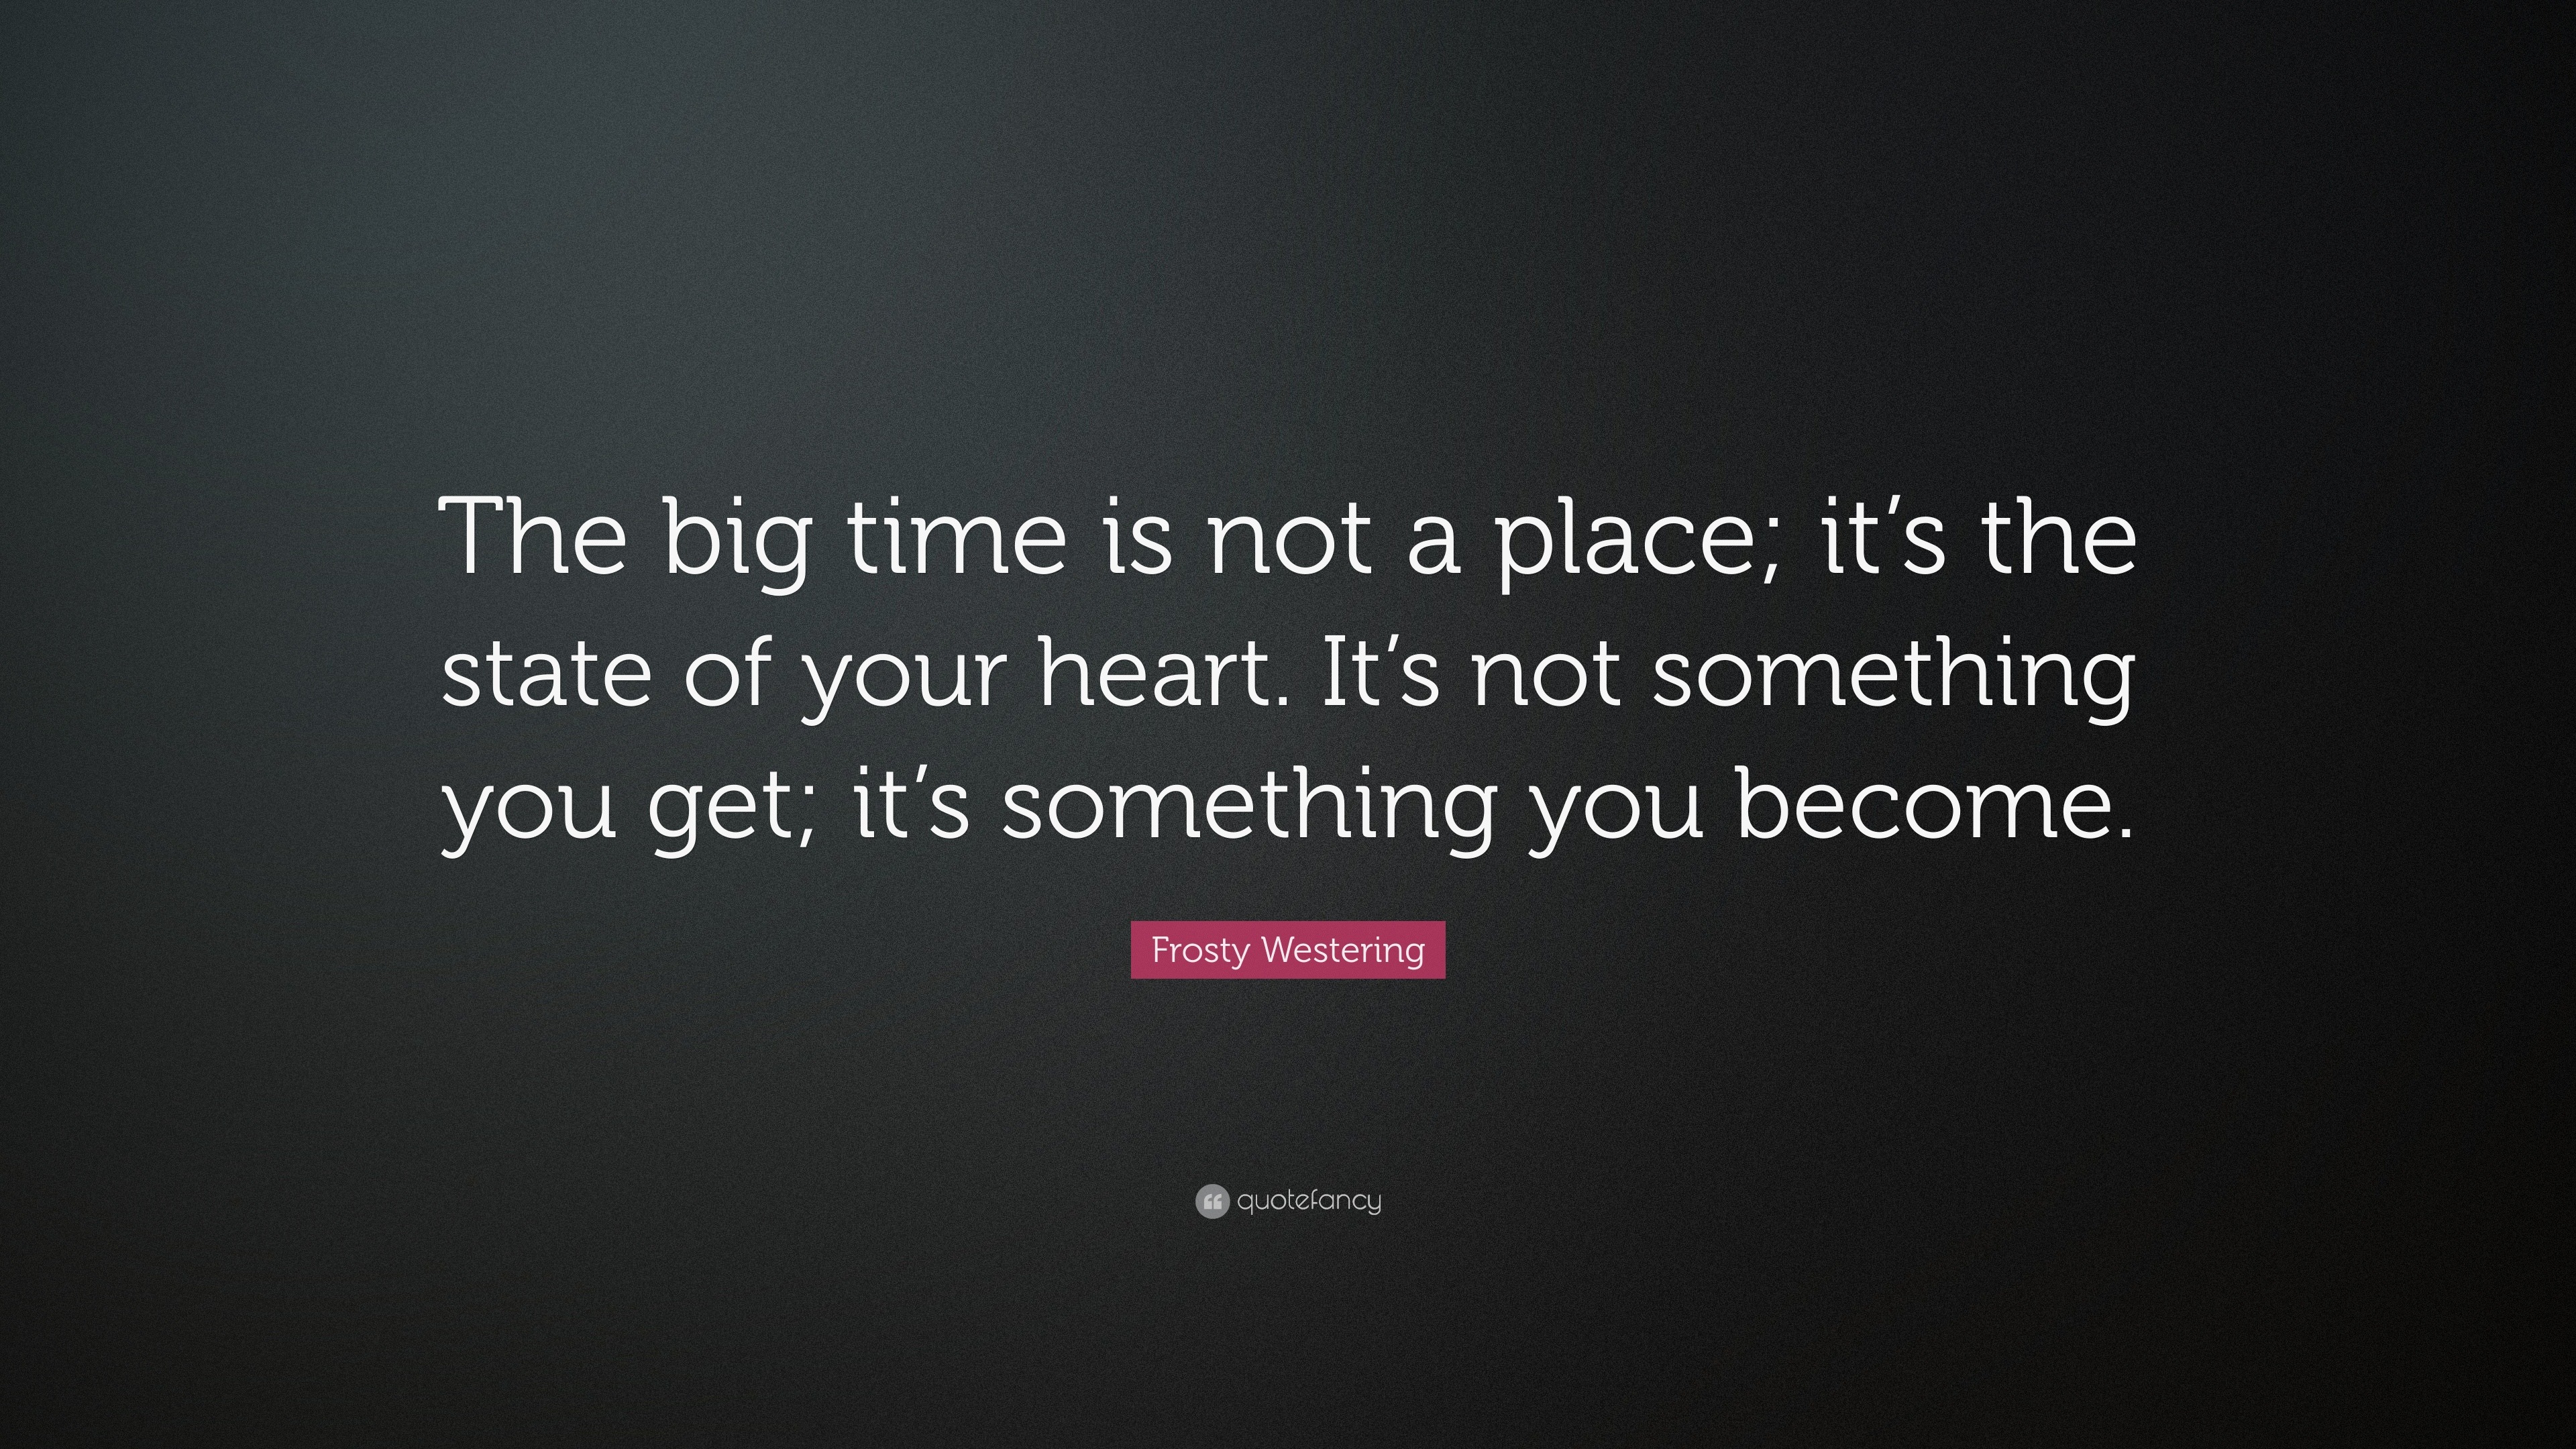 Frosty Westering Quote: “The big time is not a place; it’s the state of